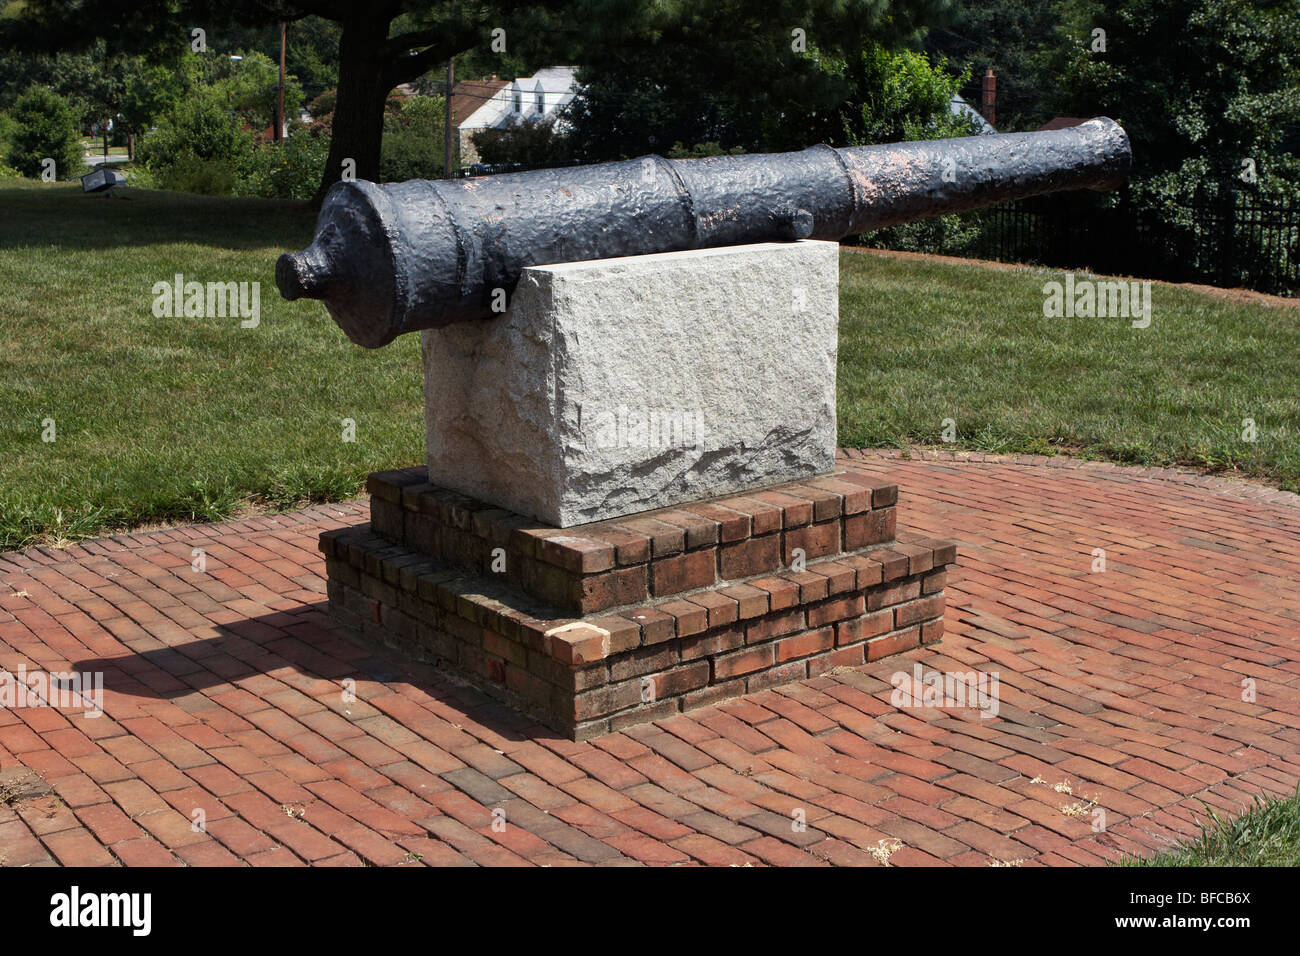 The 1634 cannon on the rear lawn of Riversdale Mansion, Riverdale Park, Maryland. Stock Photo